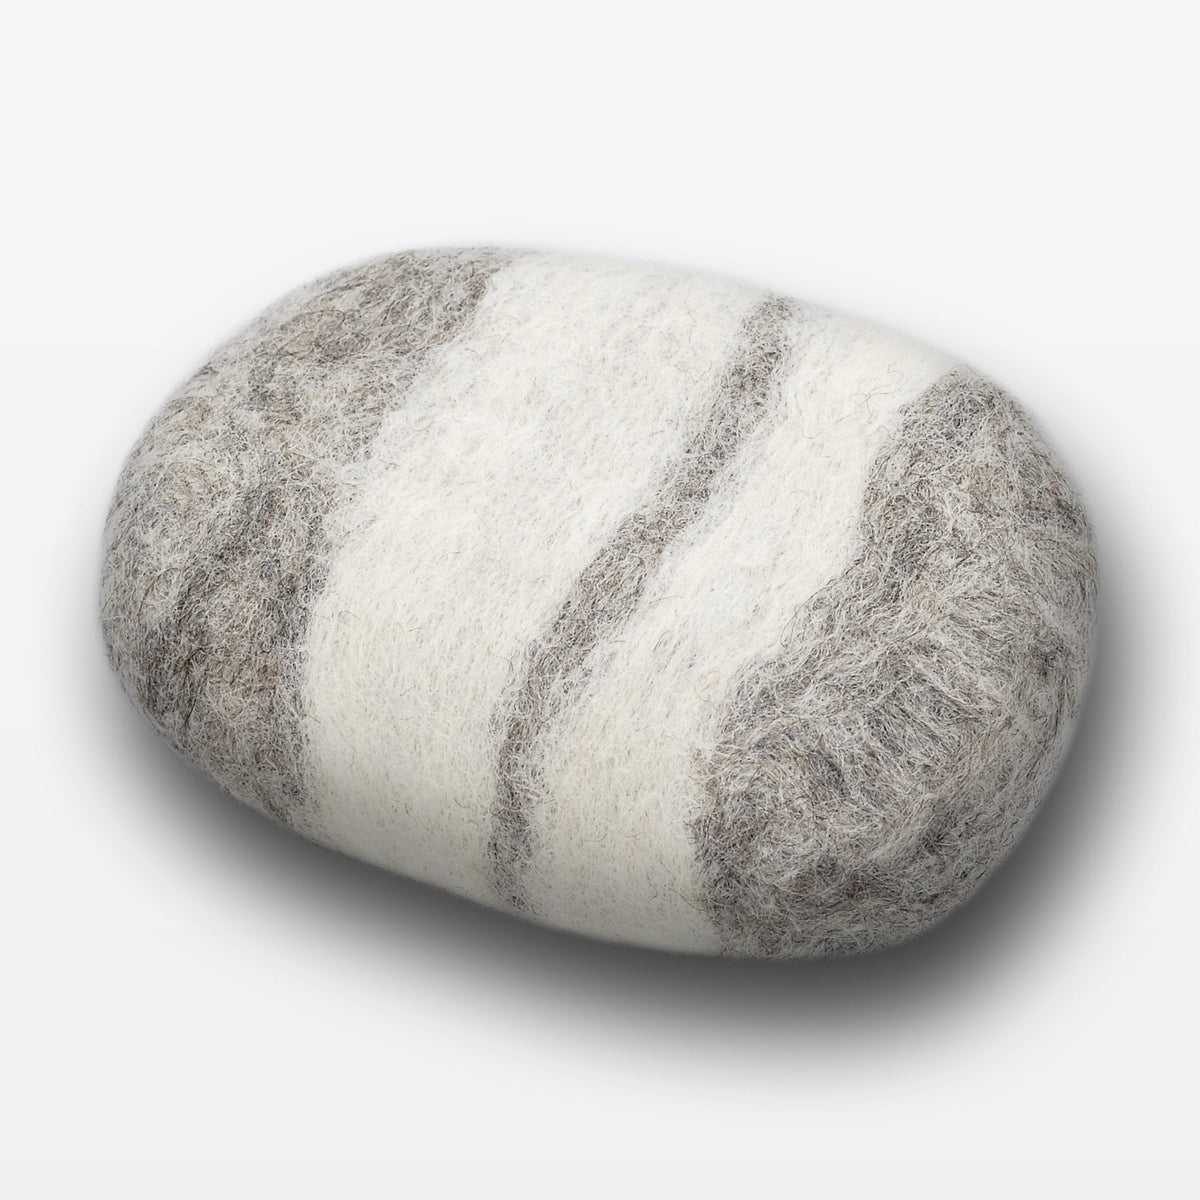 Fiat Luxe - Striped Lavender Felted Soap - Gray